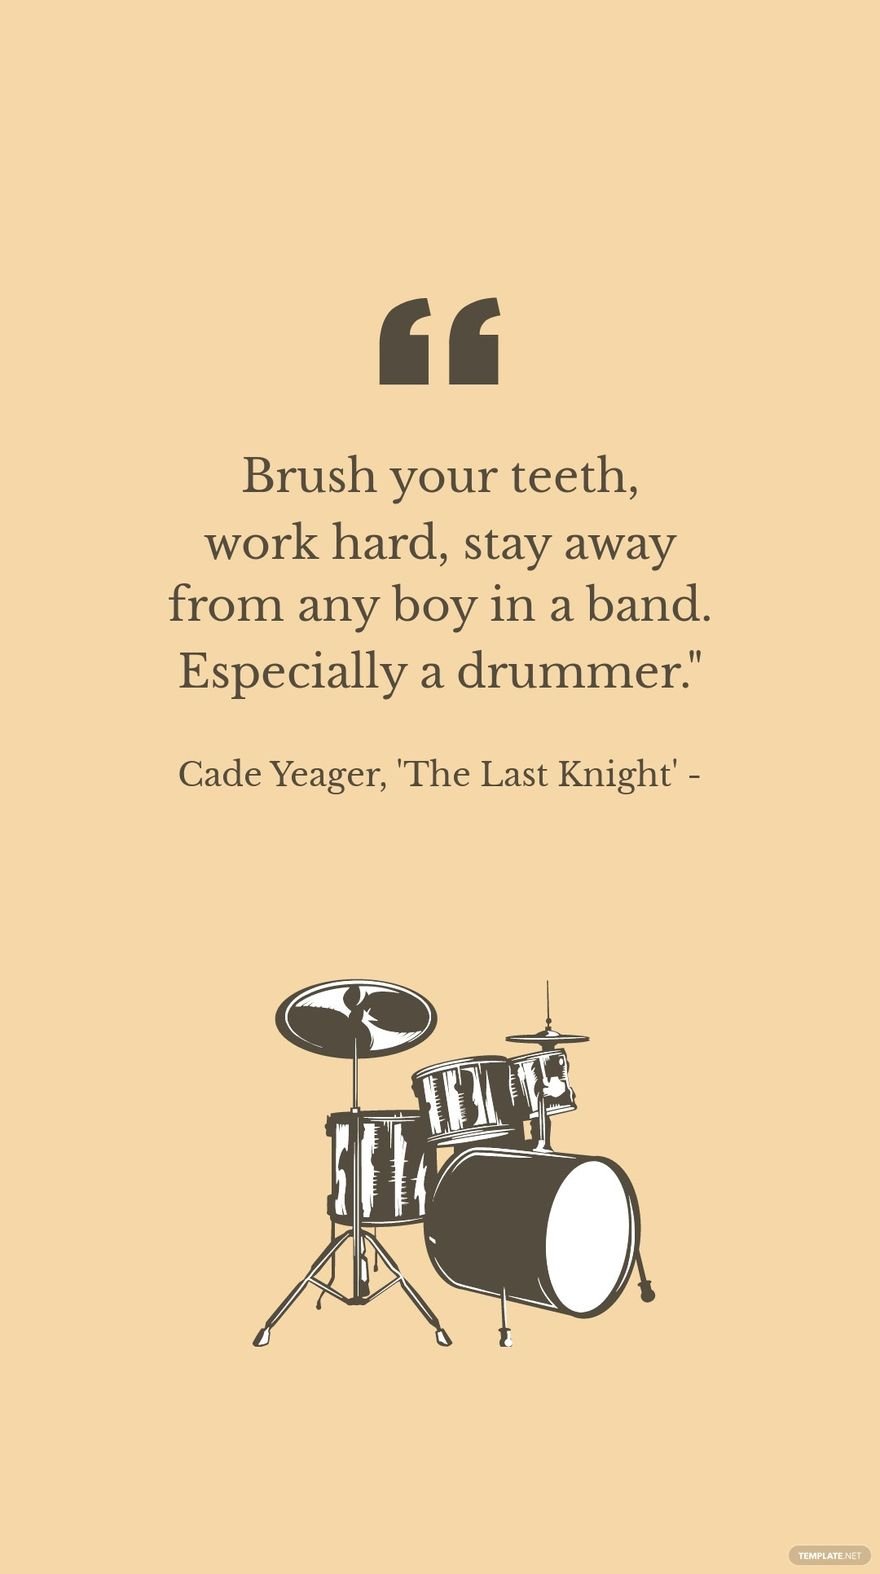 Free Cade Yeager, 'The Last Knight' - Brush your teeth, work hard, stay away from any boy in a band. Especially a drummer." in JPG